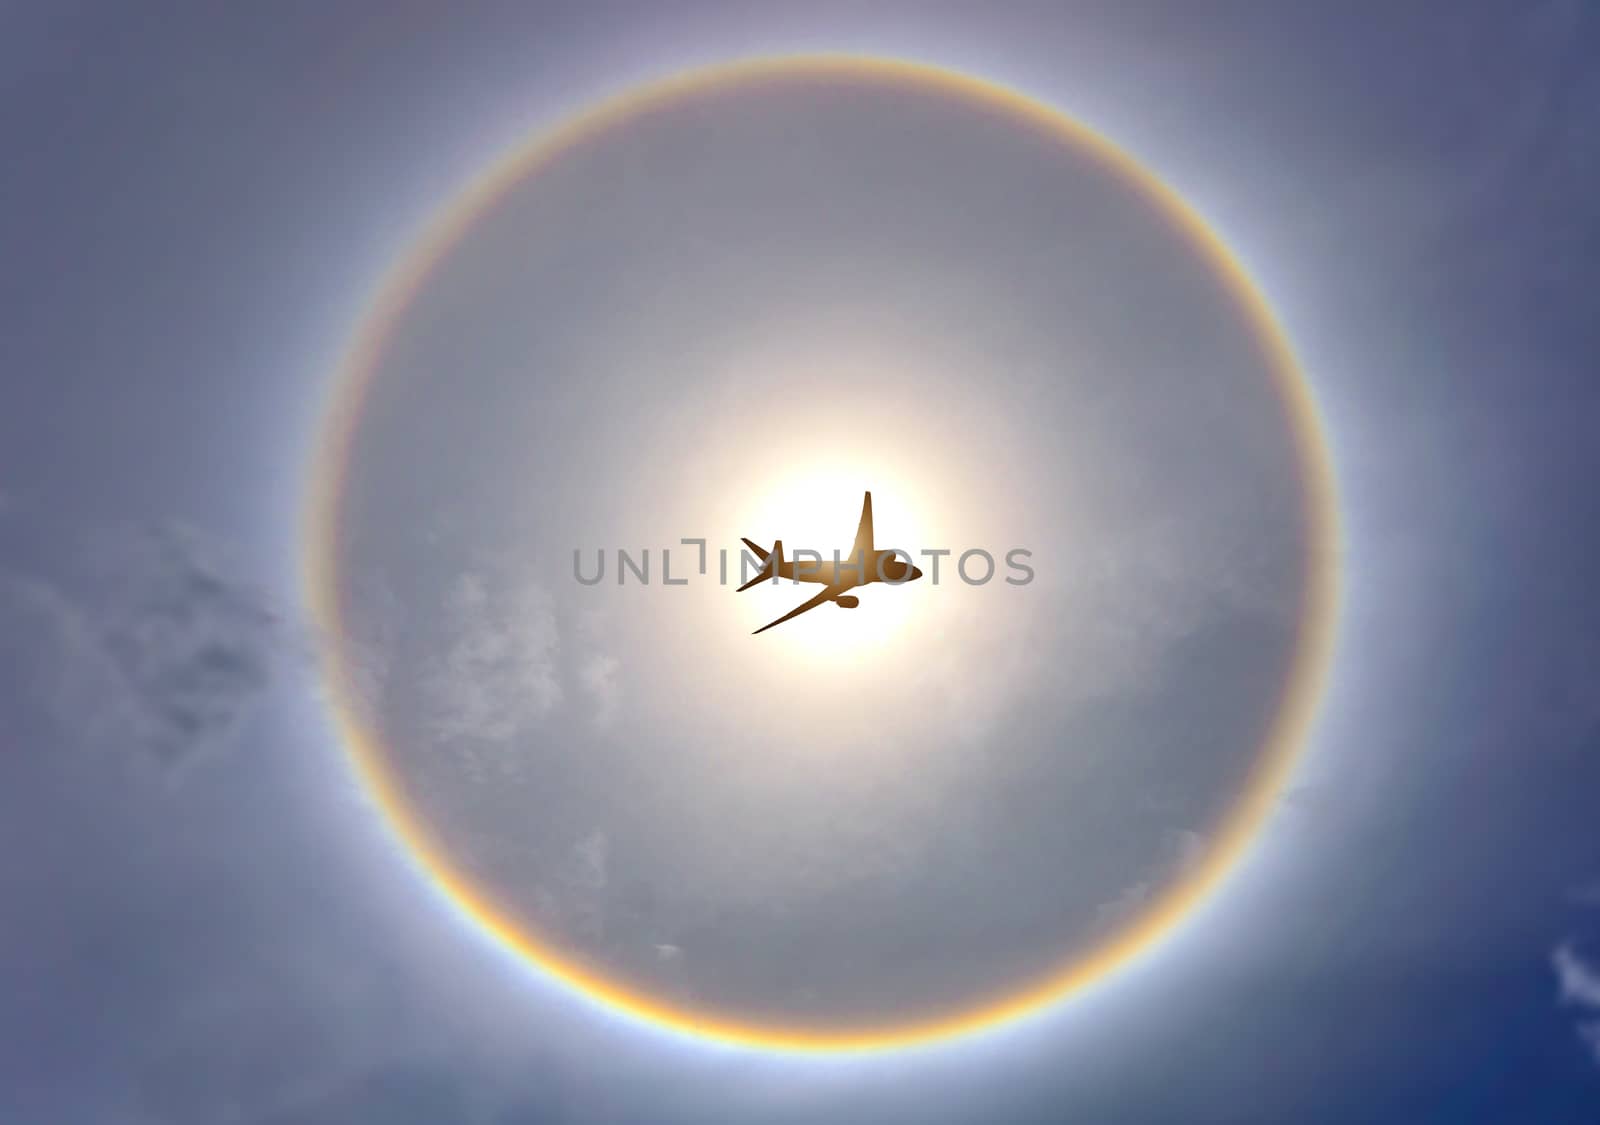 The plane is flying and has a rainbow background that exceeds the sun halo.